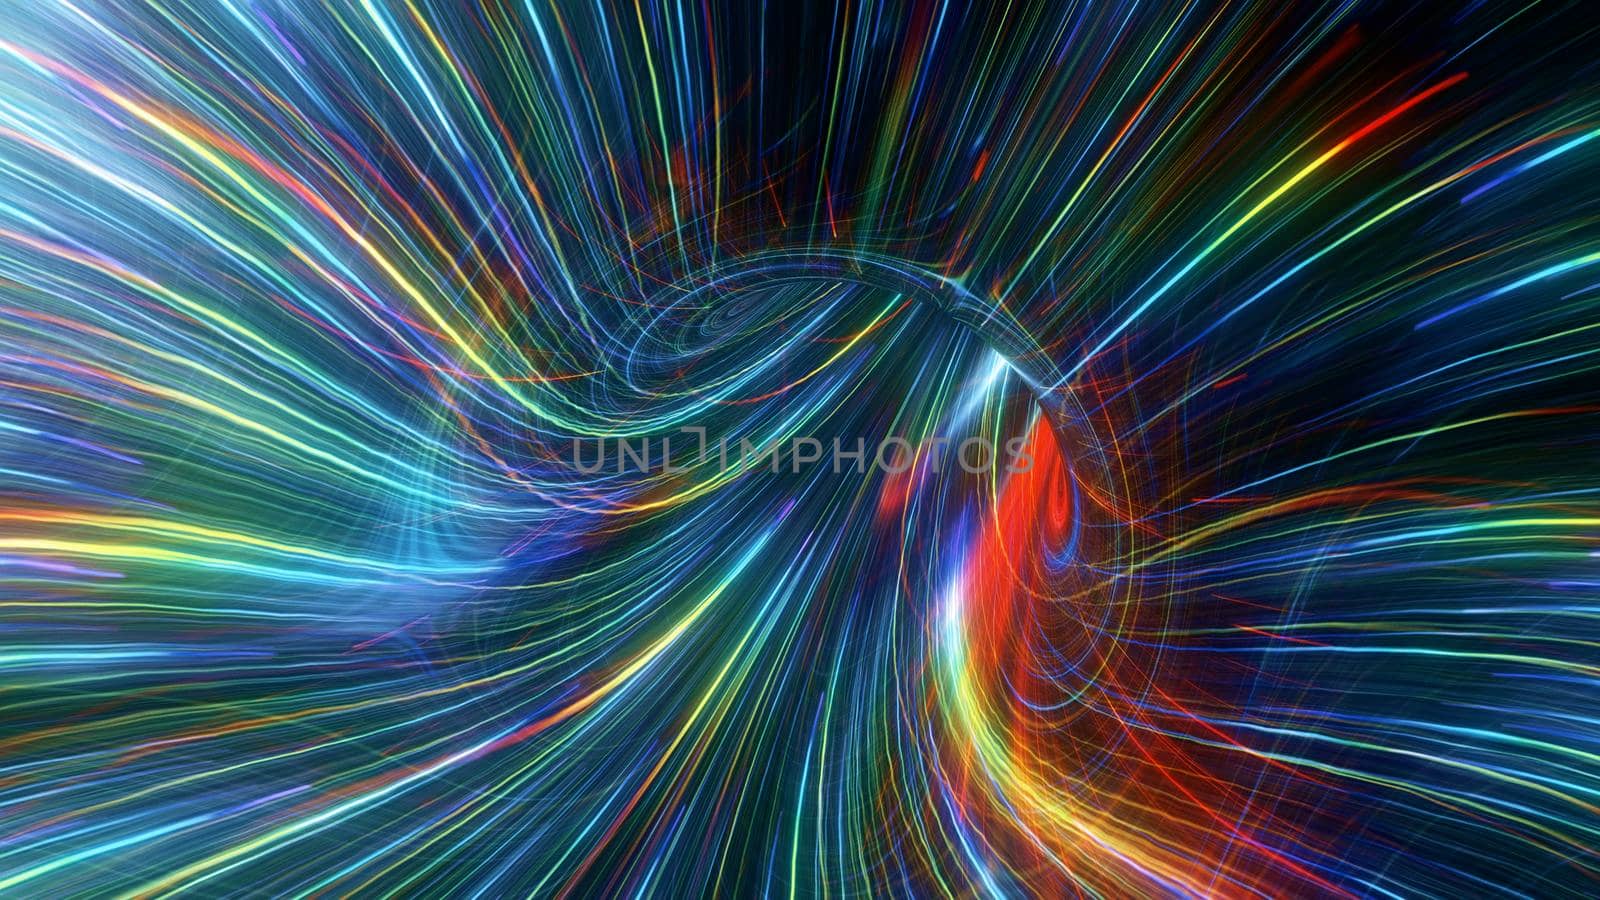 Spacetime Scifi Digital Arts concept distortion warp on space bended curved as hole